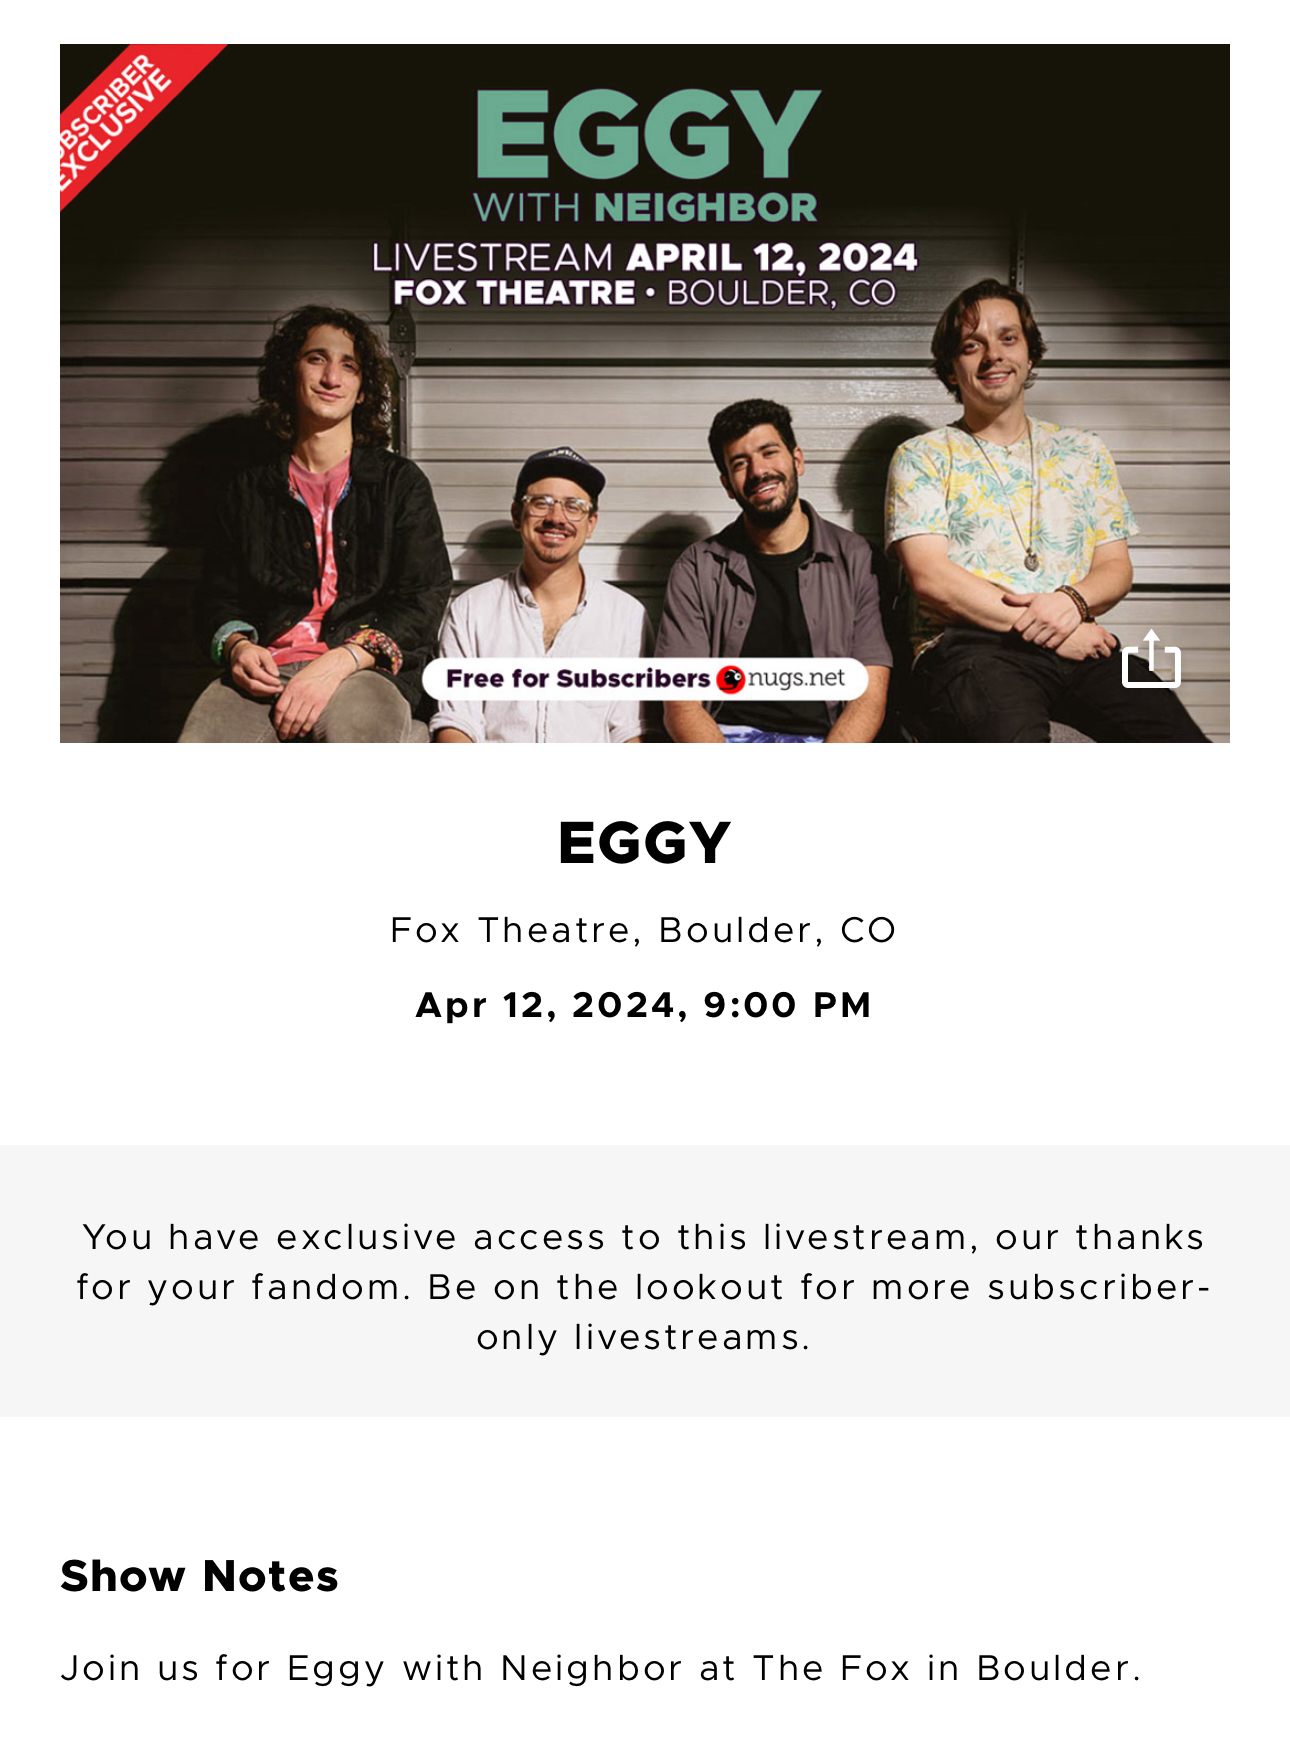 Promotional flyer for a livestream concert featuring the band Eggy with Neighbor at the Fox Theatre in Boulder, CO on April 12, 2024, at 9:00 PM, exclusive to nuggets.net subscribers. There is a photor